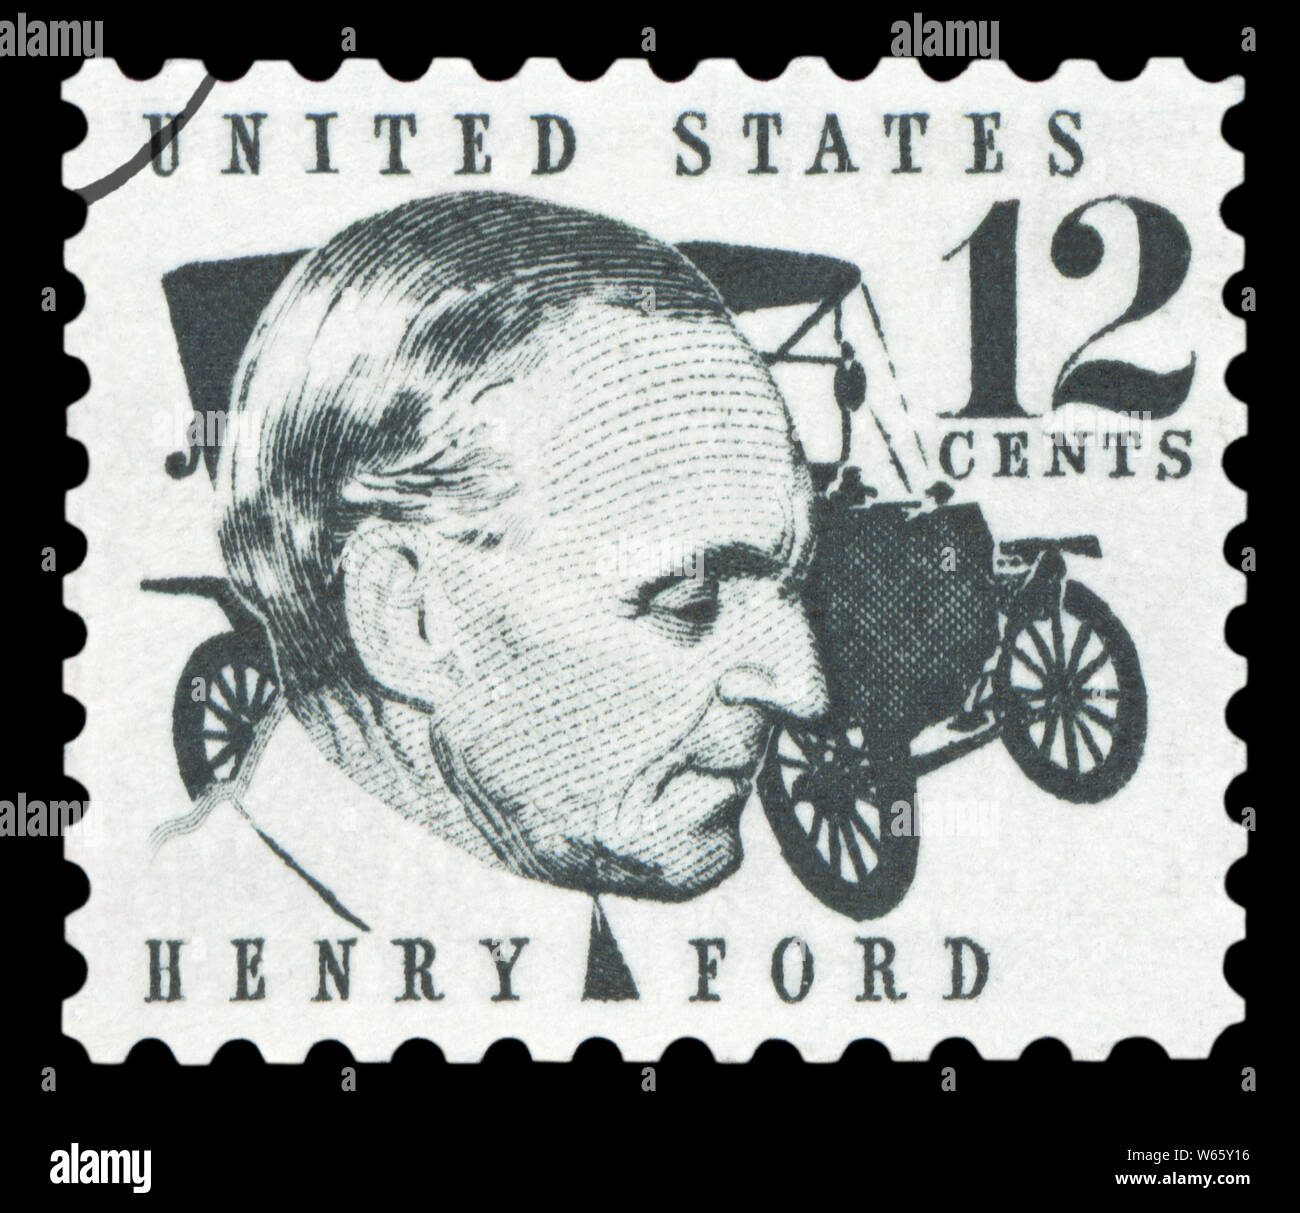 UNITED STATES OF AMERICA - CIRCA 1968: A stamp printed in USA shows Henry Ford (1863-1947) and car Ford Model T from 1909, circa 1968. Stock Photo